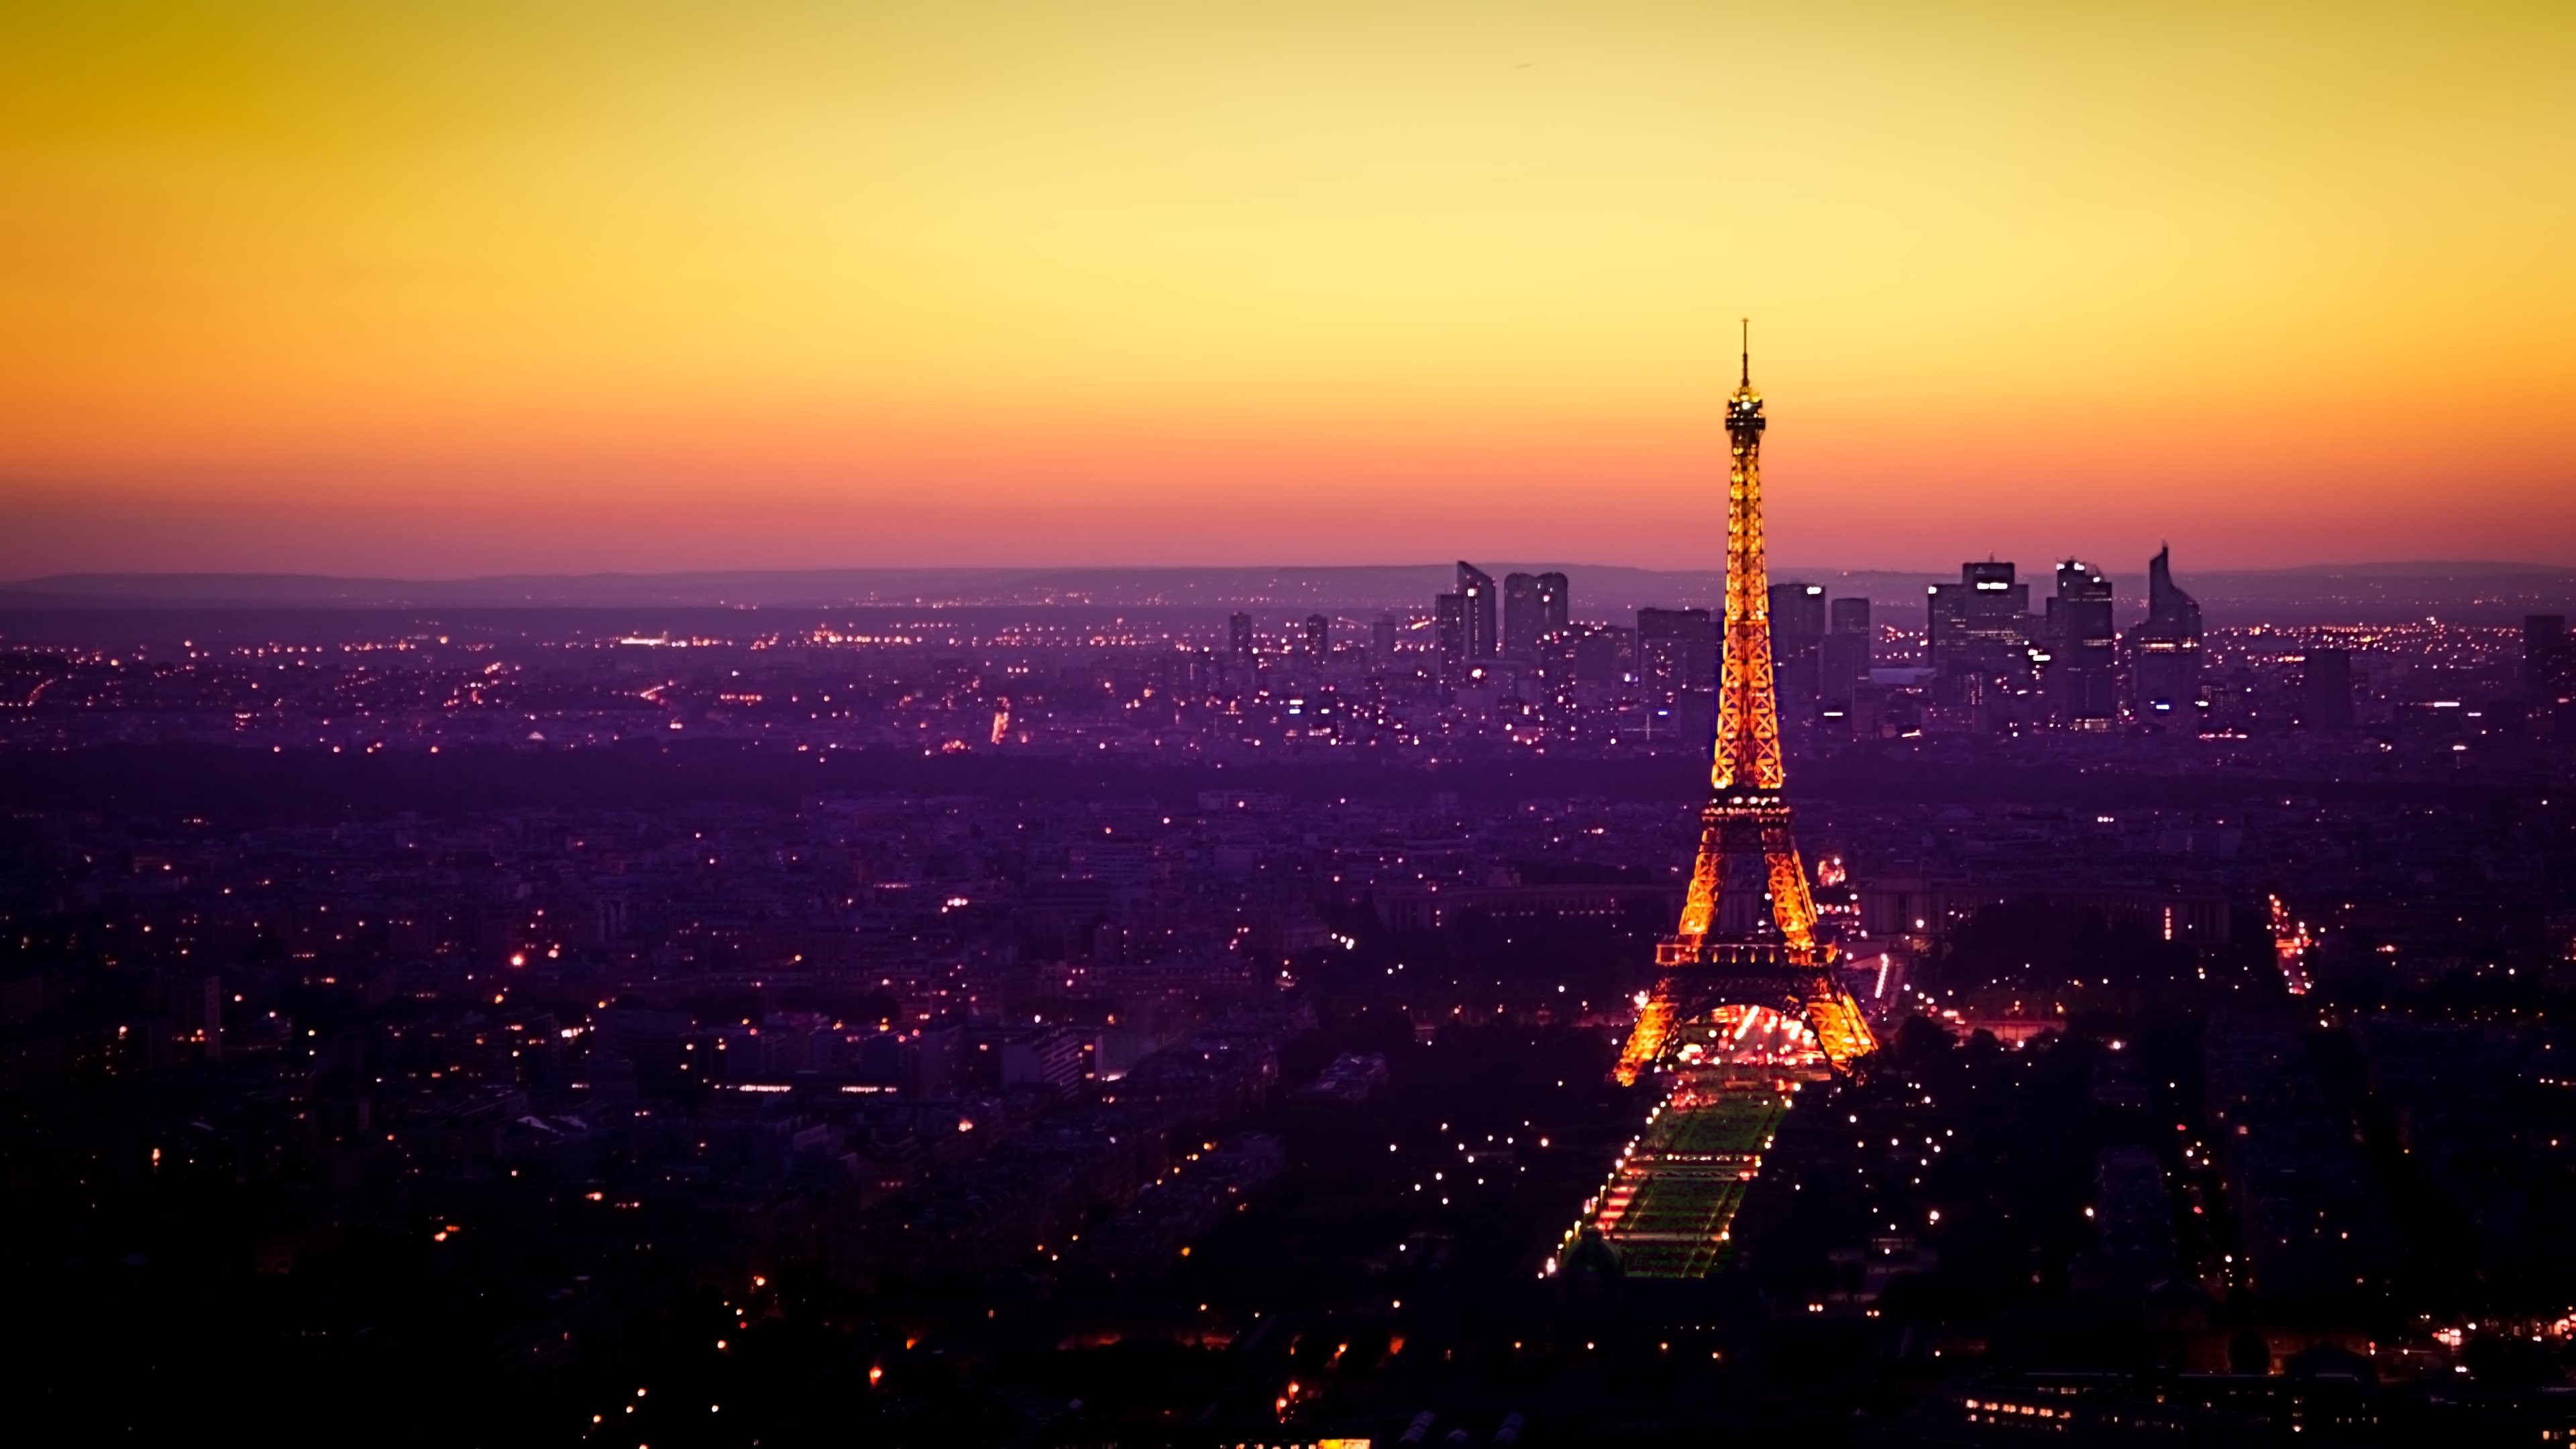 3840x2160 Paris Wallpaper Hd Collection For Free Download | HD Wallpapers | Pinterest  | Paris wallpaper, Wallpaper and Hd wallpaper